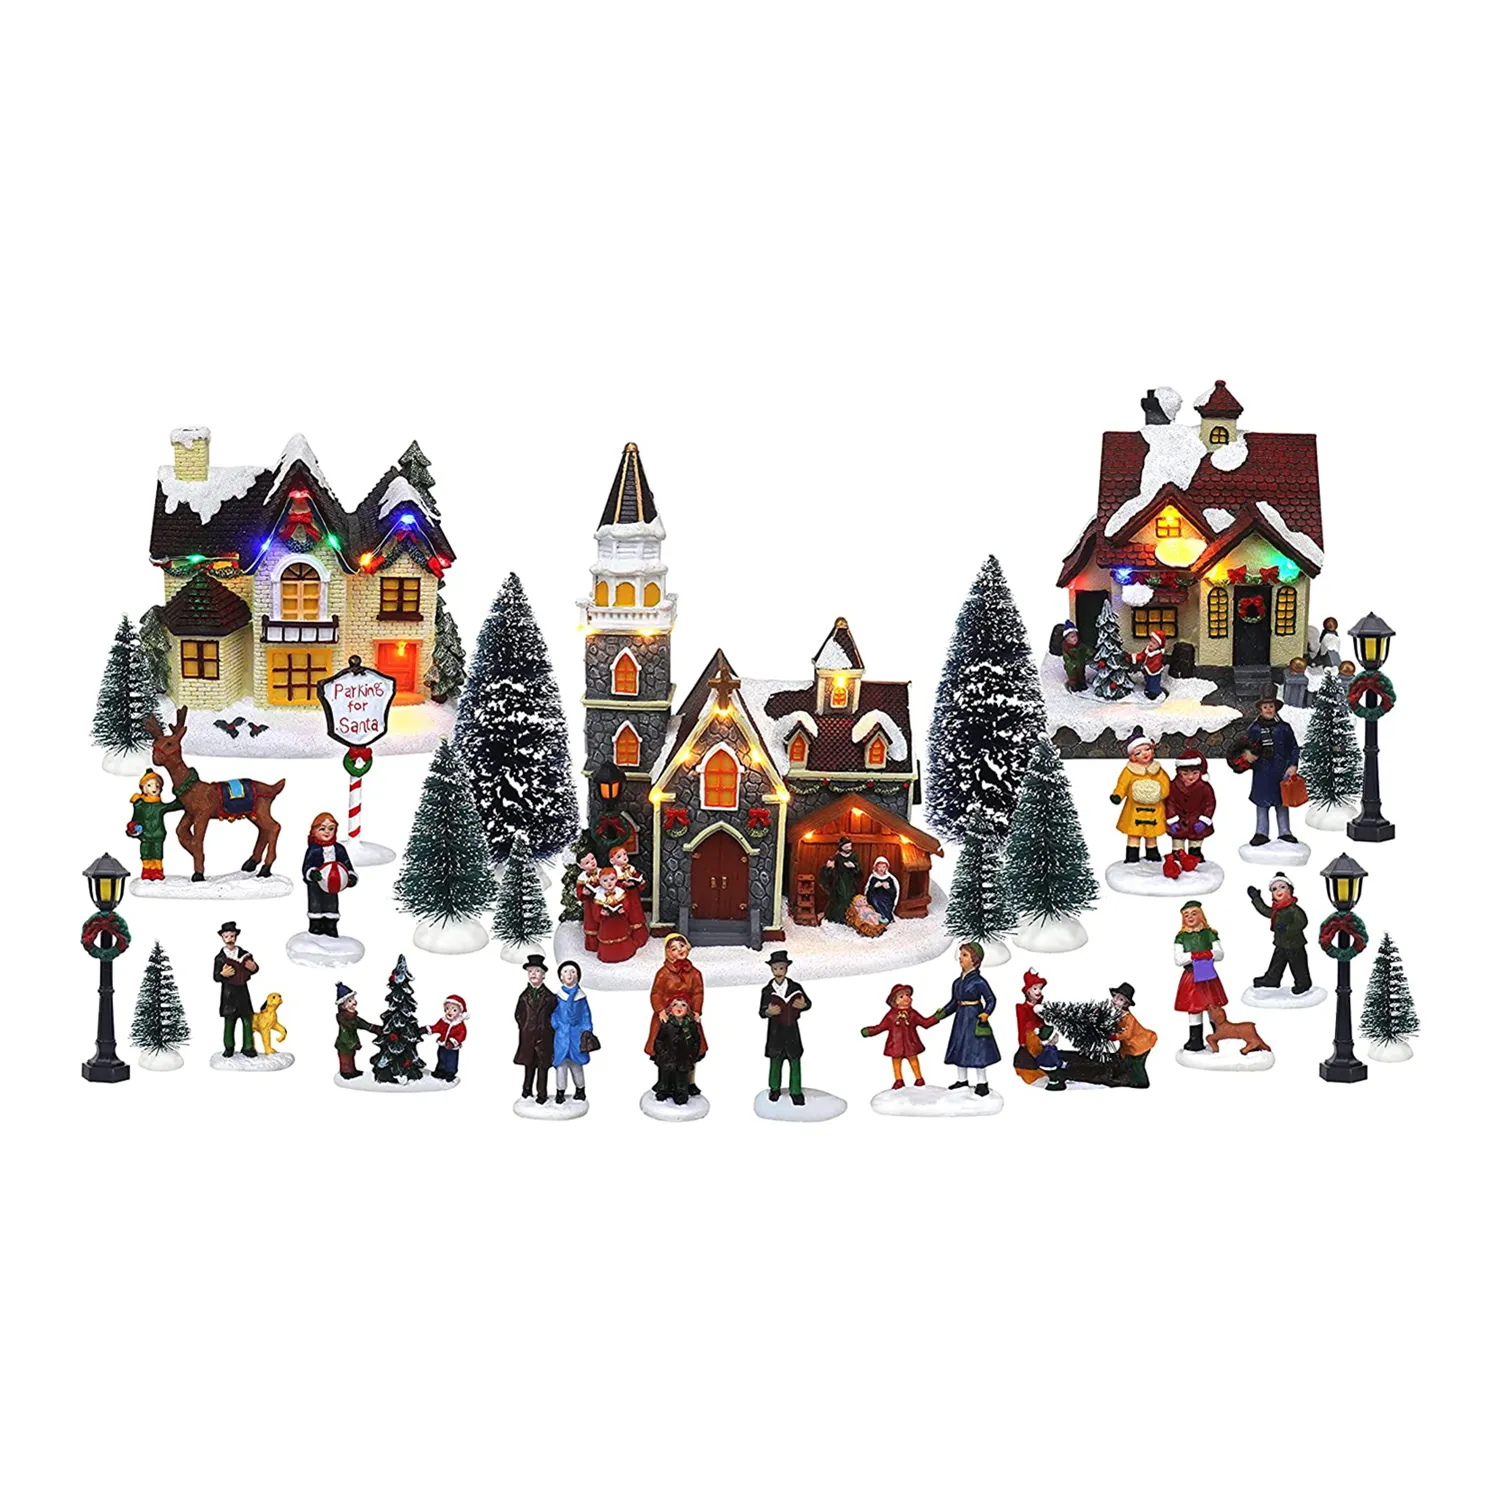 LED Christmas Village Sets: Lighted Village Houses Xmas Tree Street Christmas Doll Figurines Accessories Town Lit Building